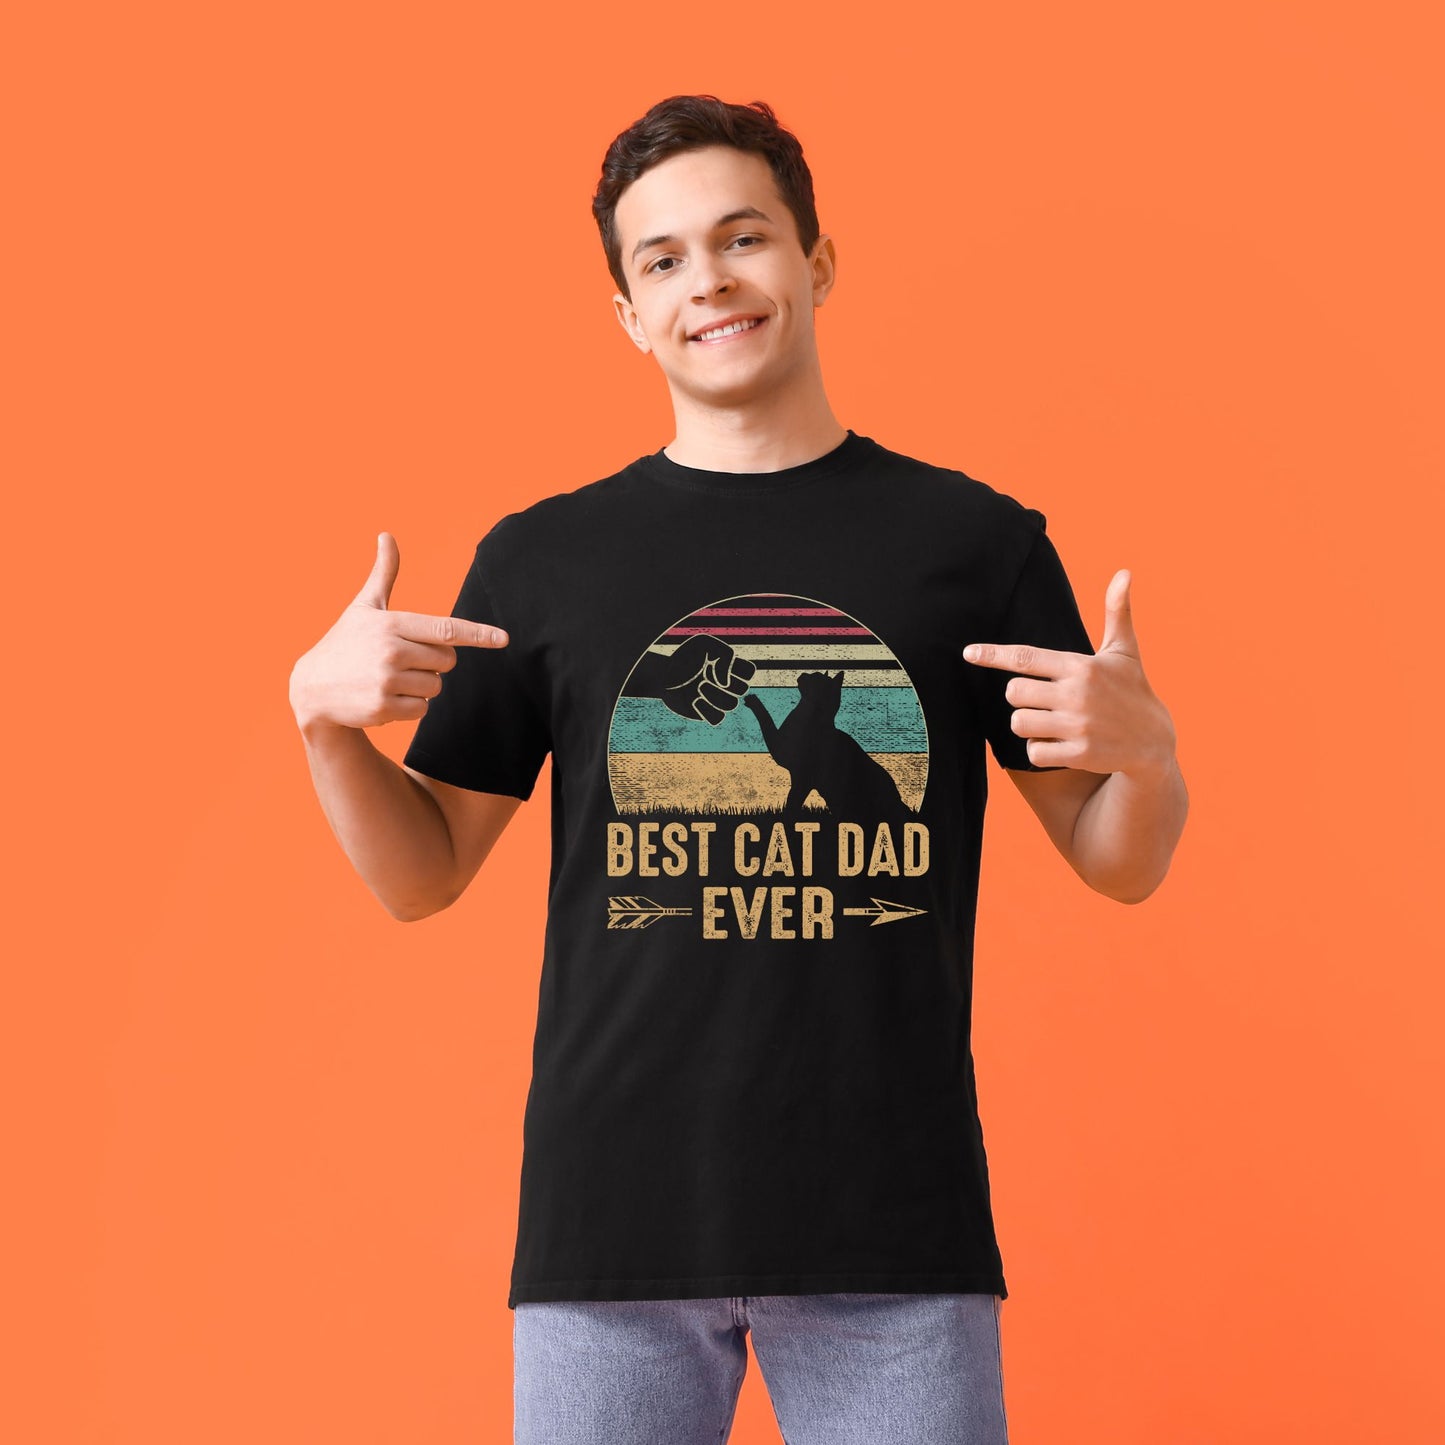 "Cat Dad Ever" T-Shirt for Vintage Father's Day Gift